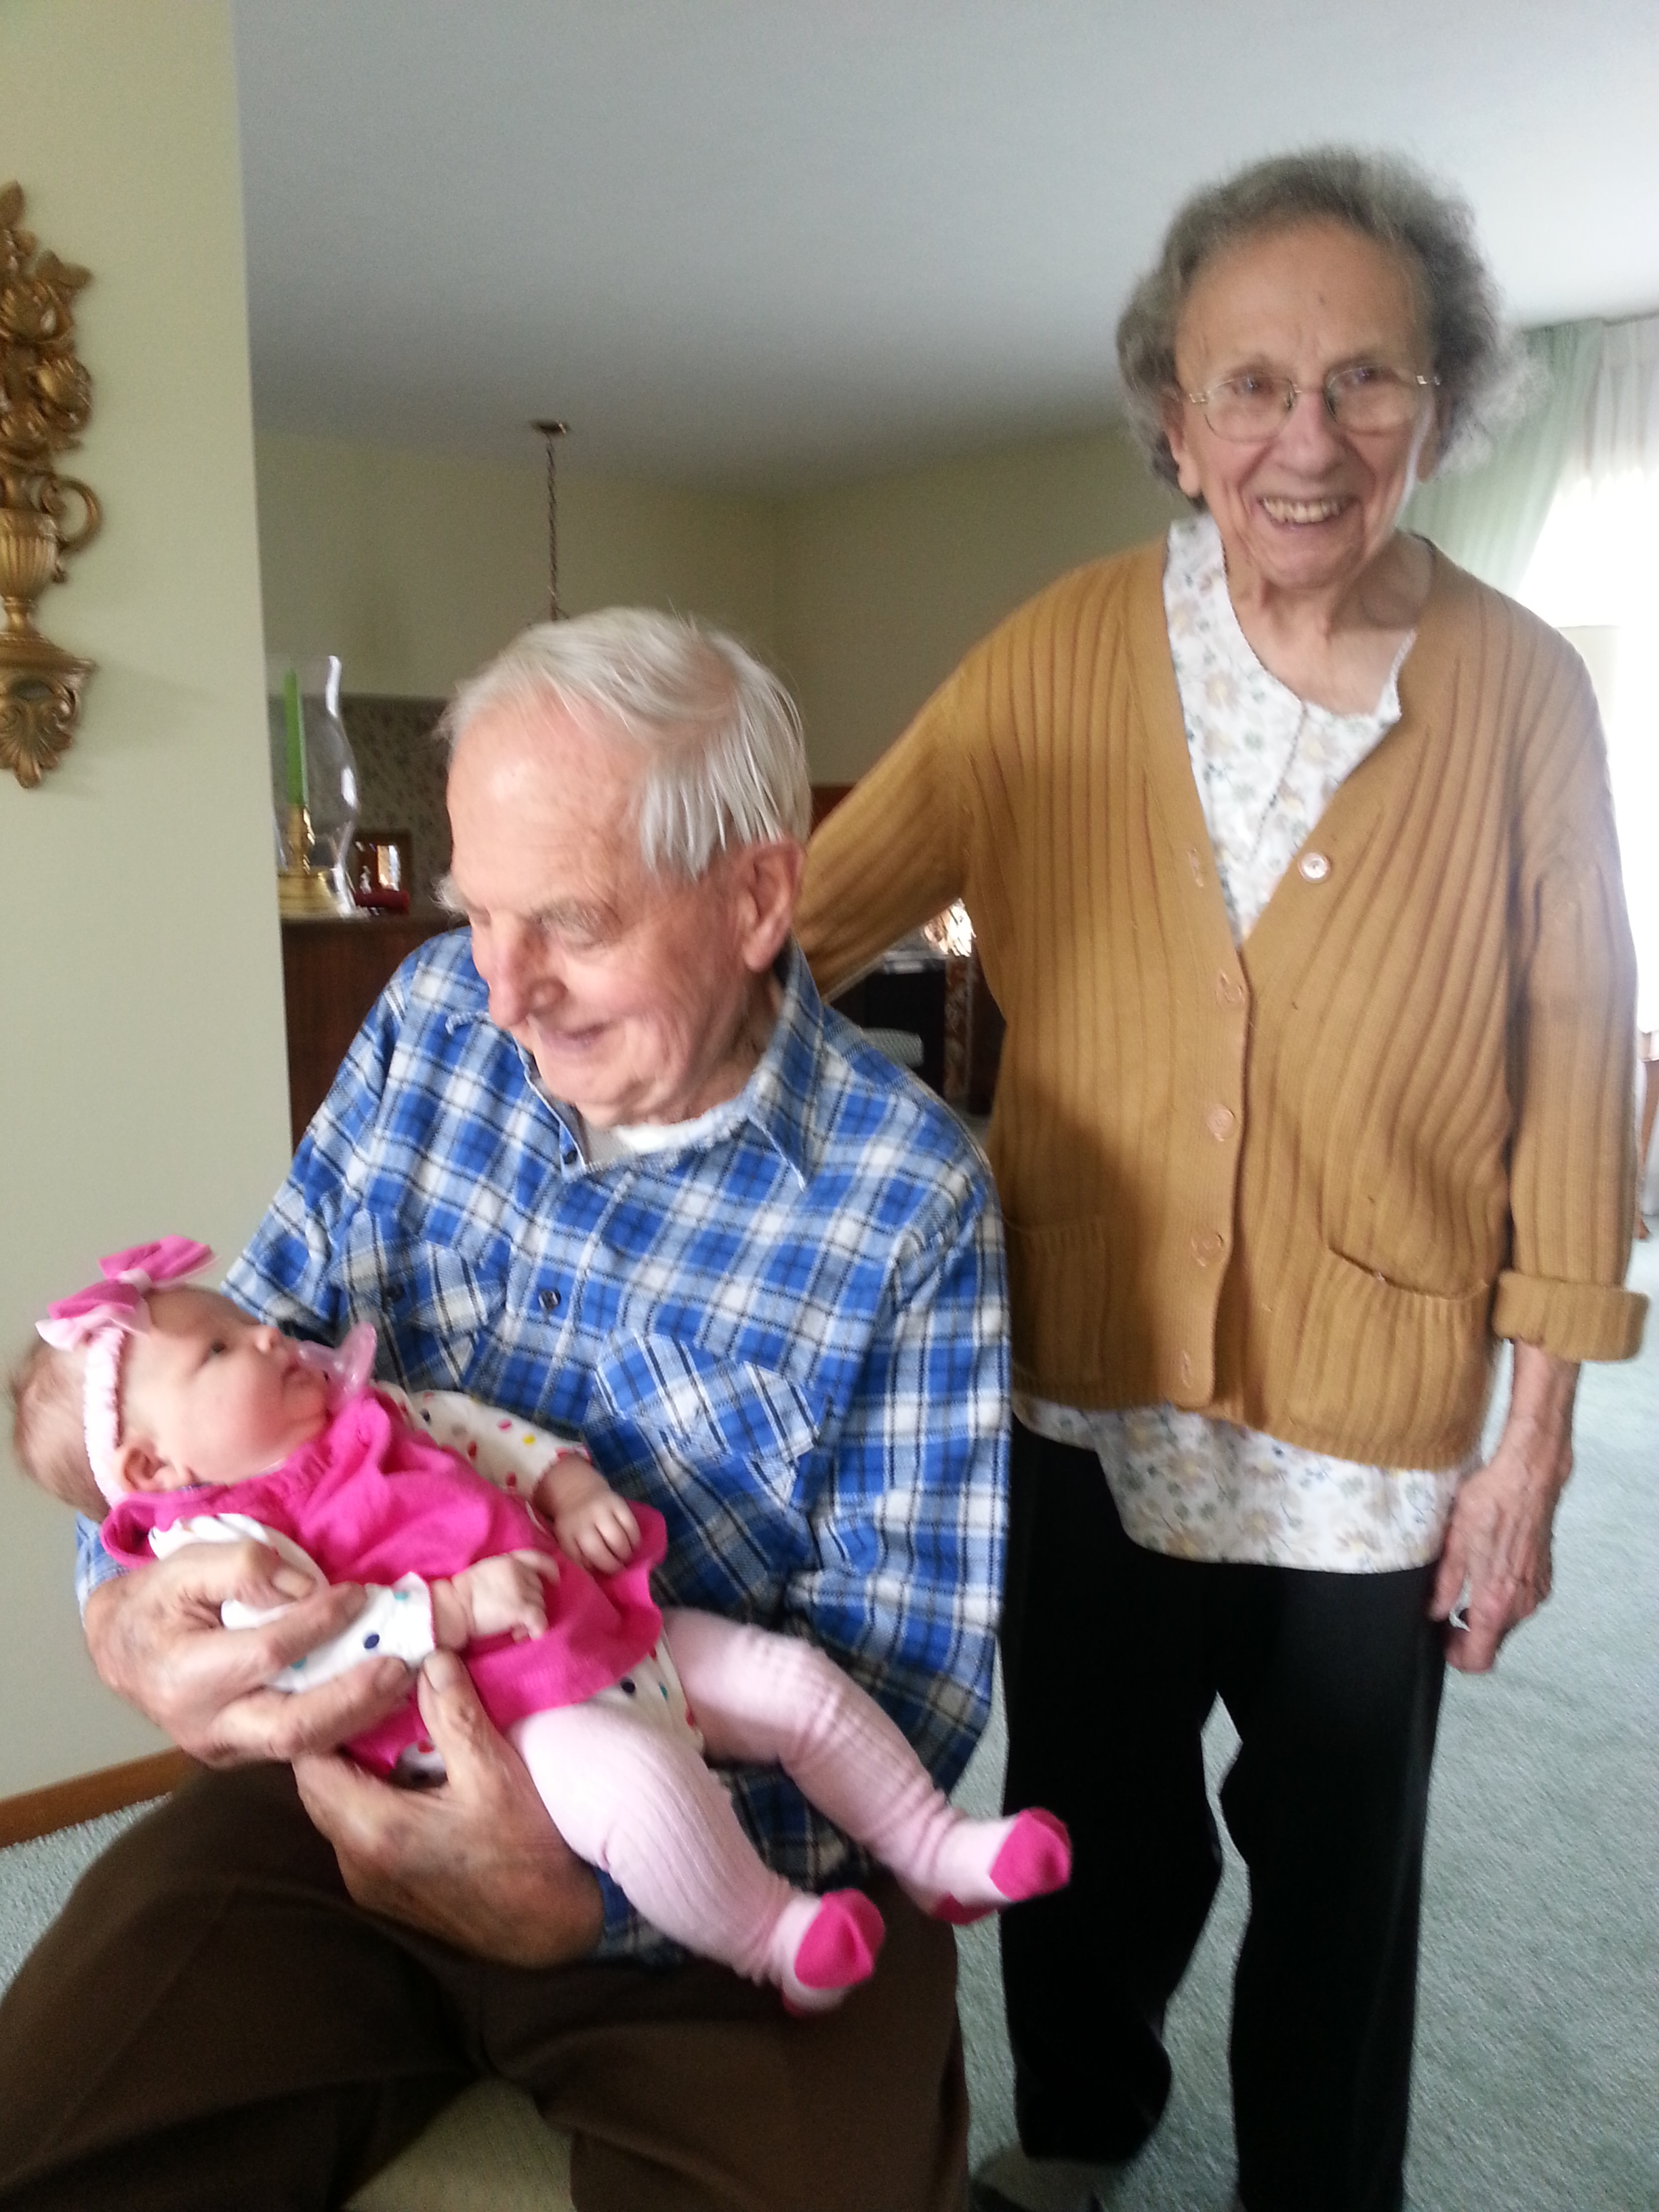 Makenzie's GREAT grandparents.  What a lucky lady she is to have 6 grandparents!